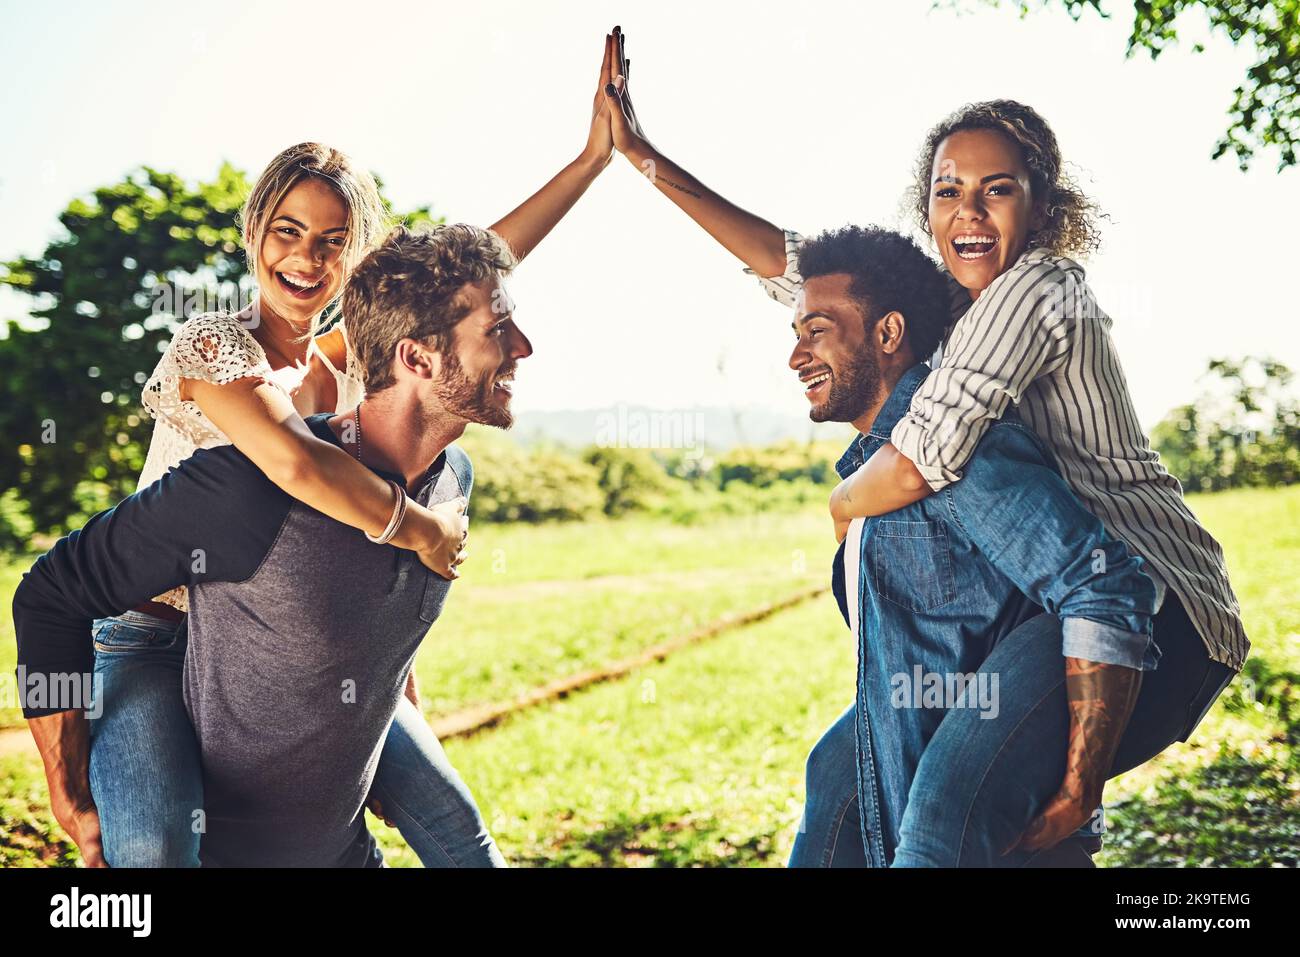 Bring on the fun times. Portrait of two happy young couples out on a double date. Stock Photo